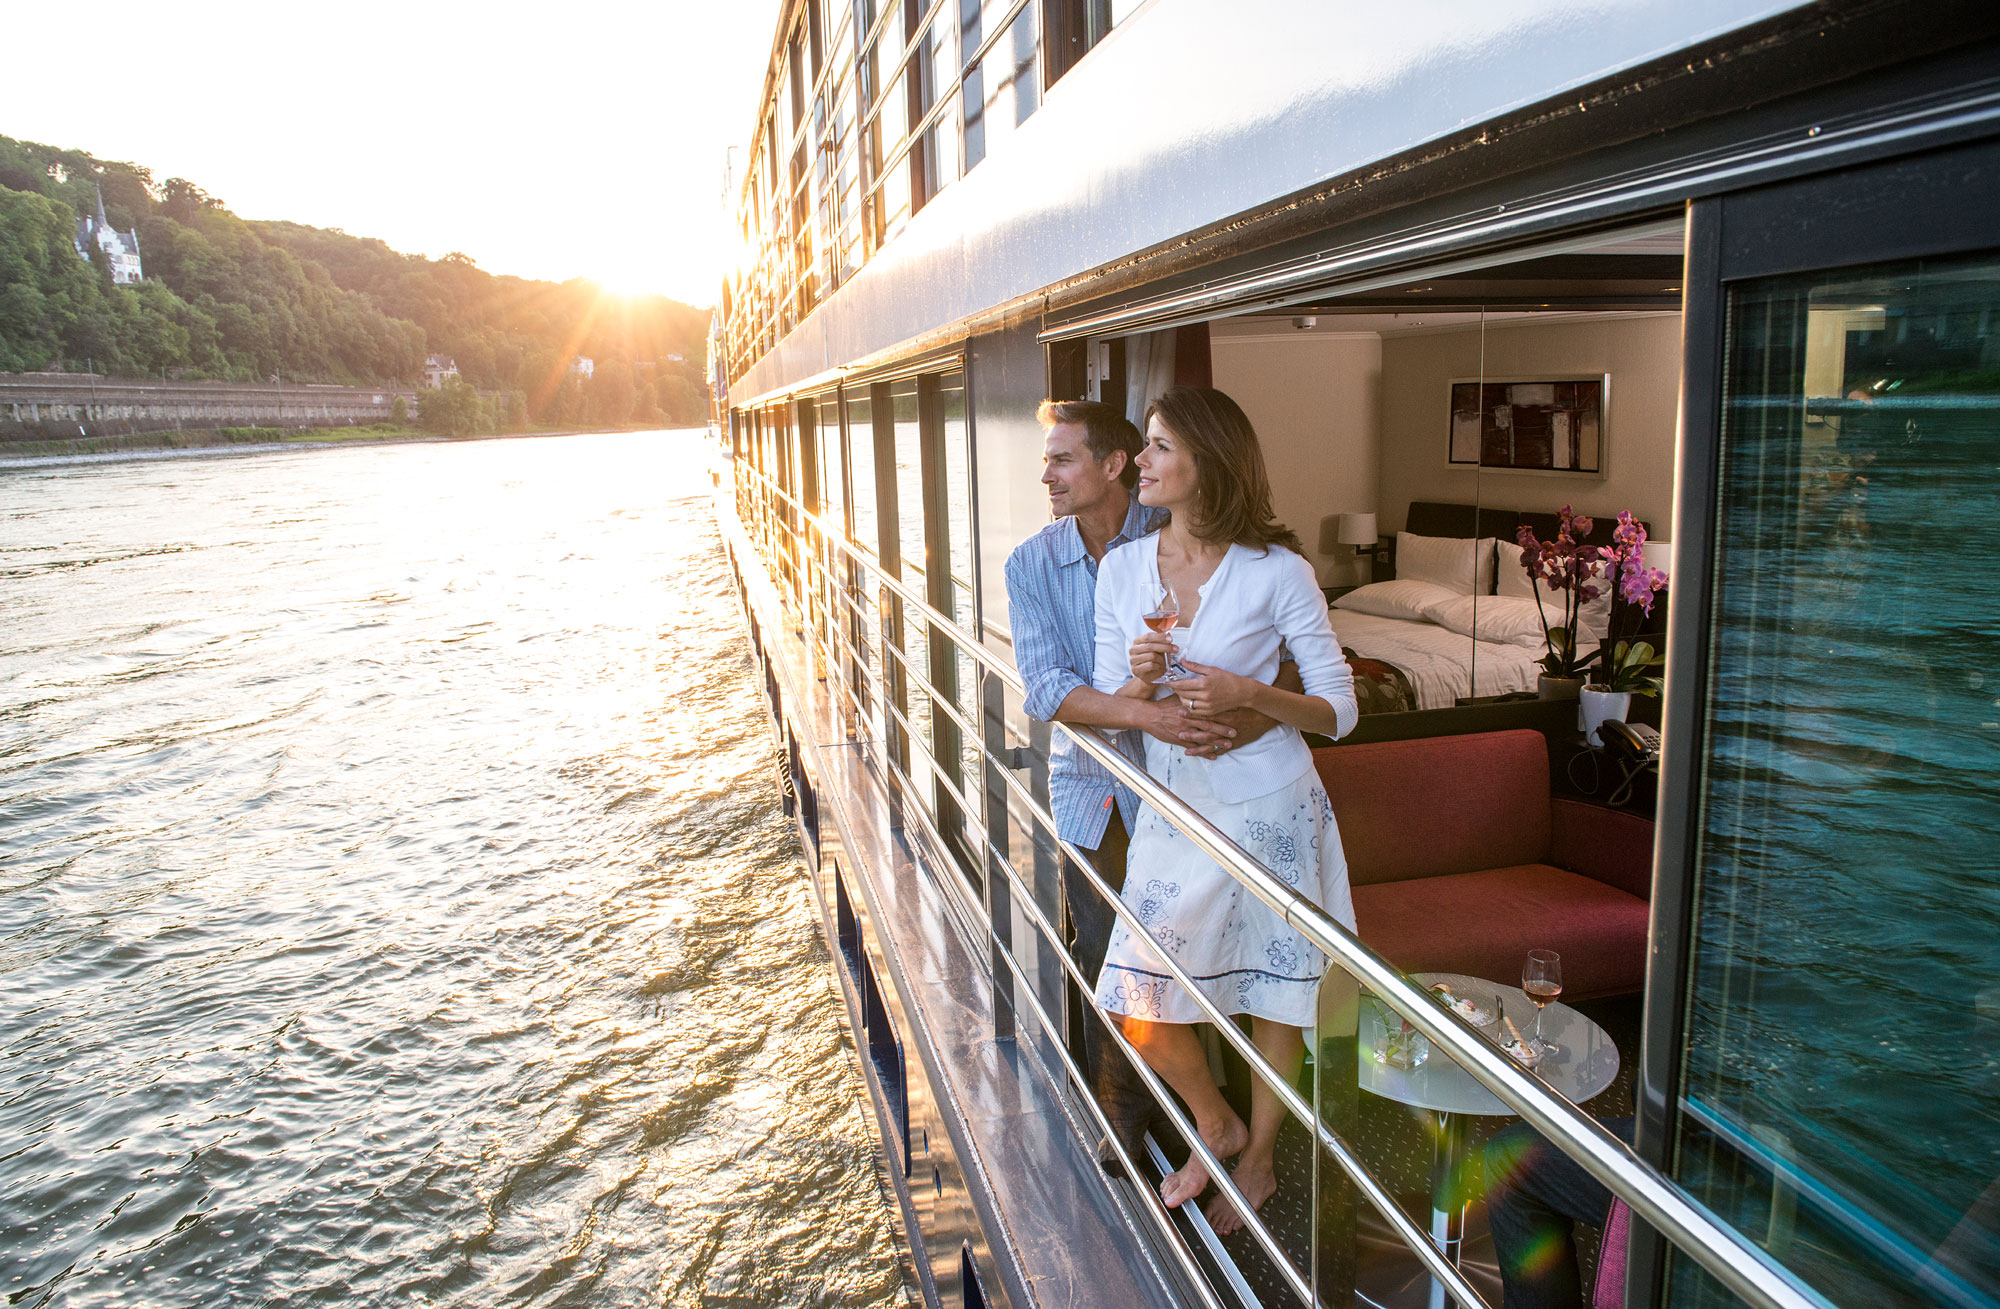 Fall in love with Avalon Waterways’ approach to river cruising